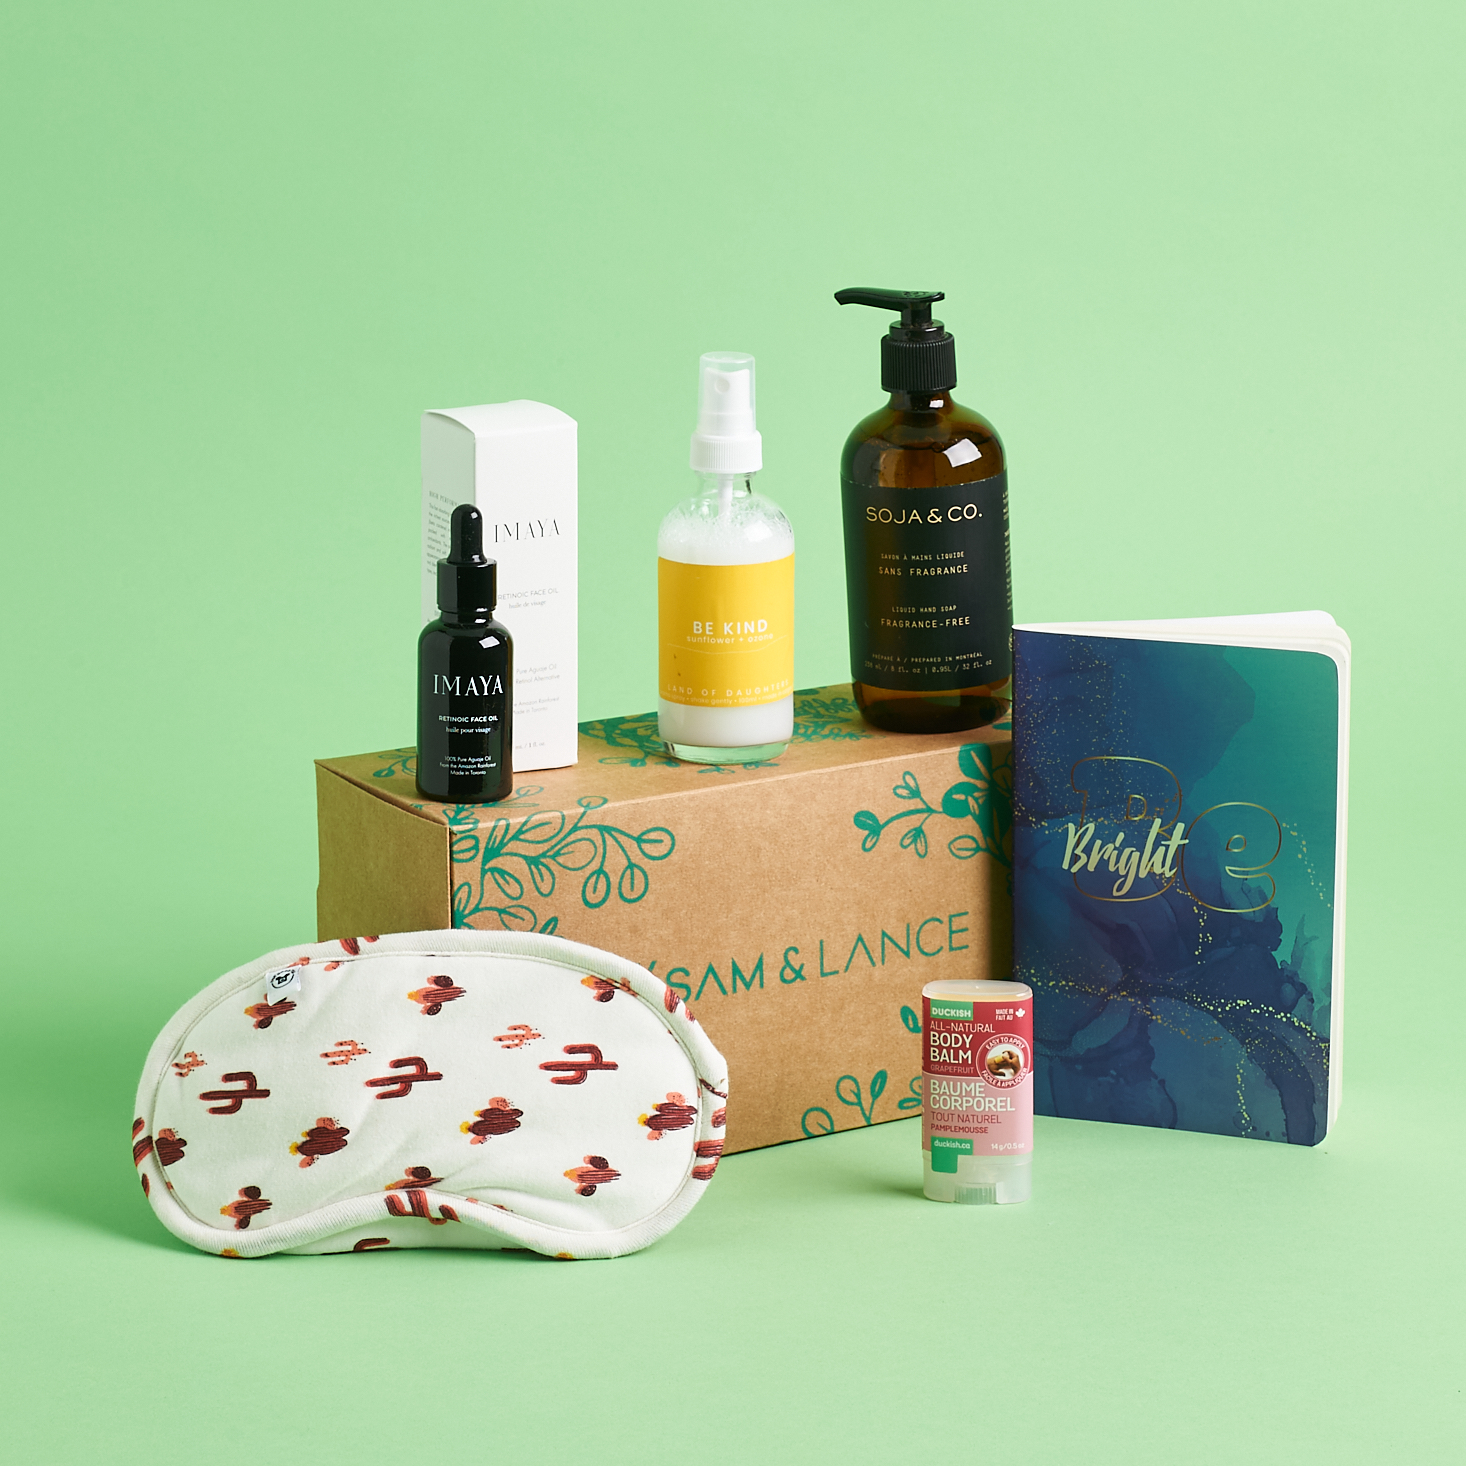 SAM & LANCE Empower-Her Summer 2021 Subscription Box Review